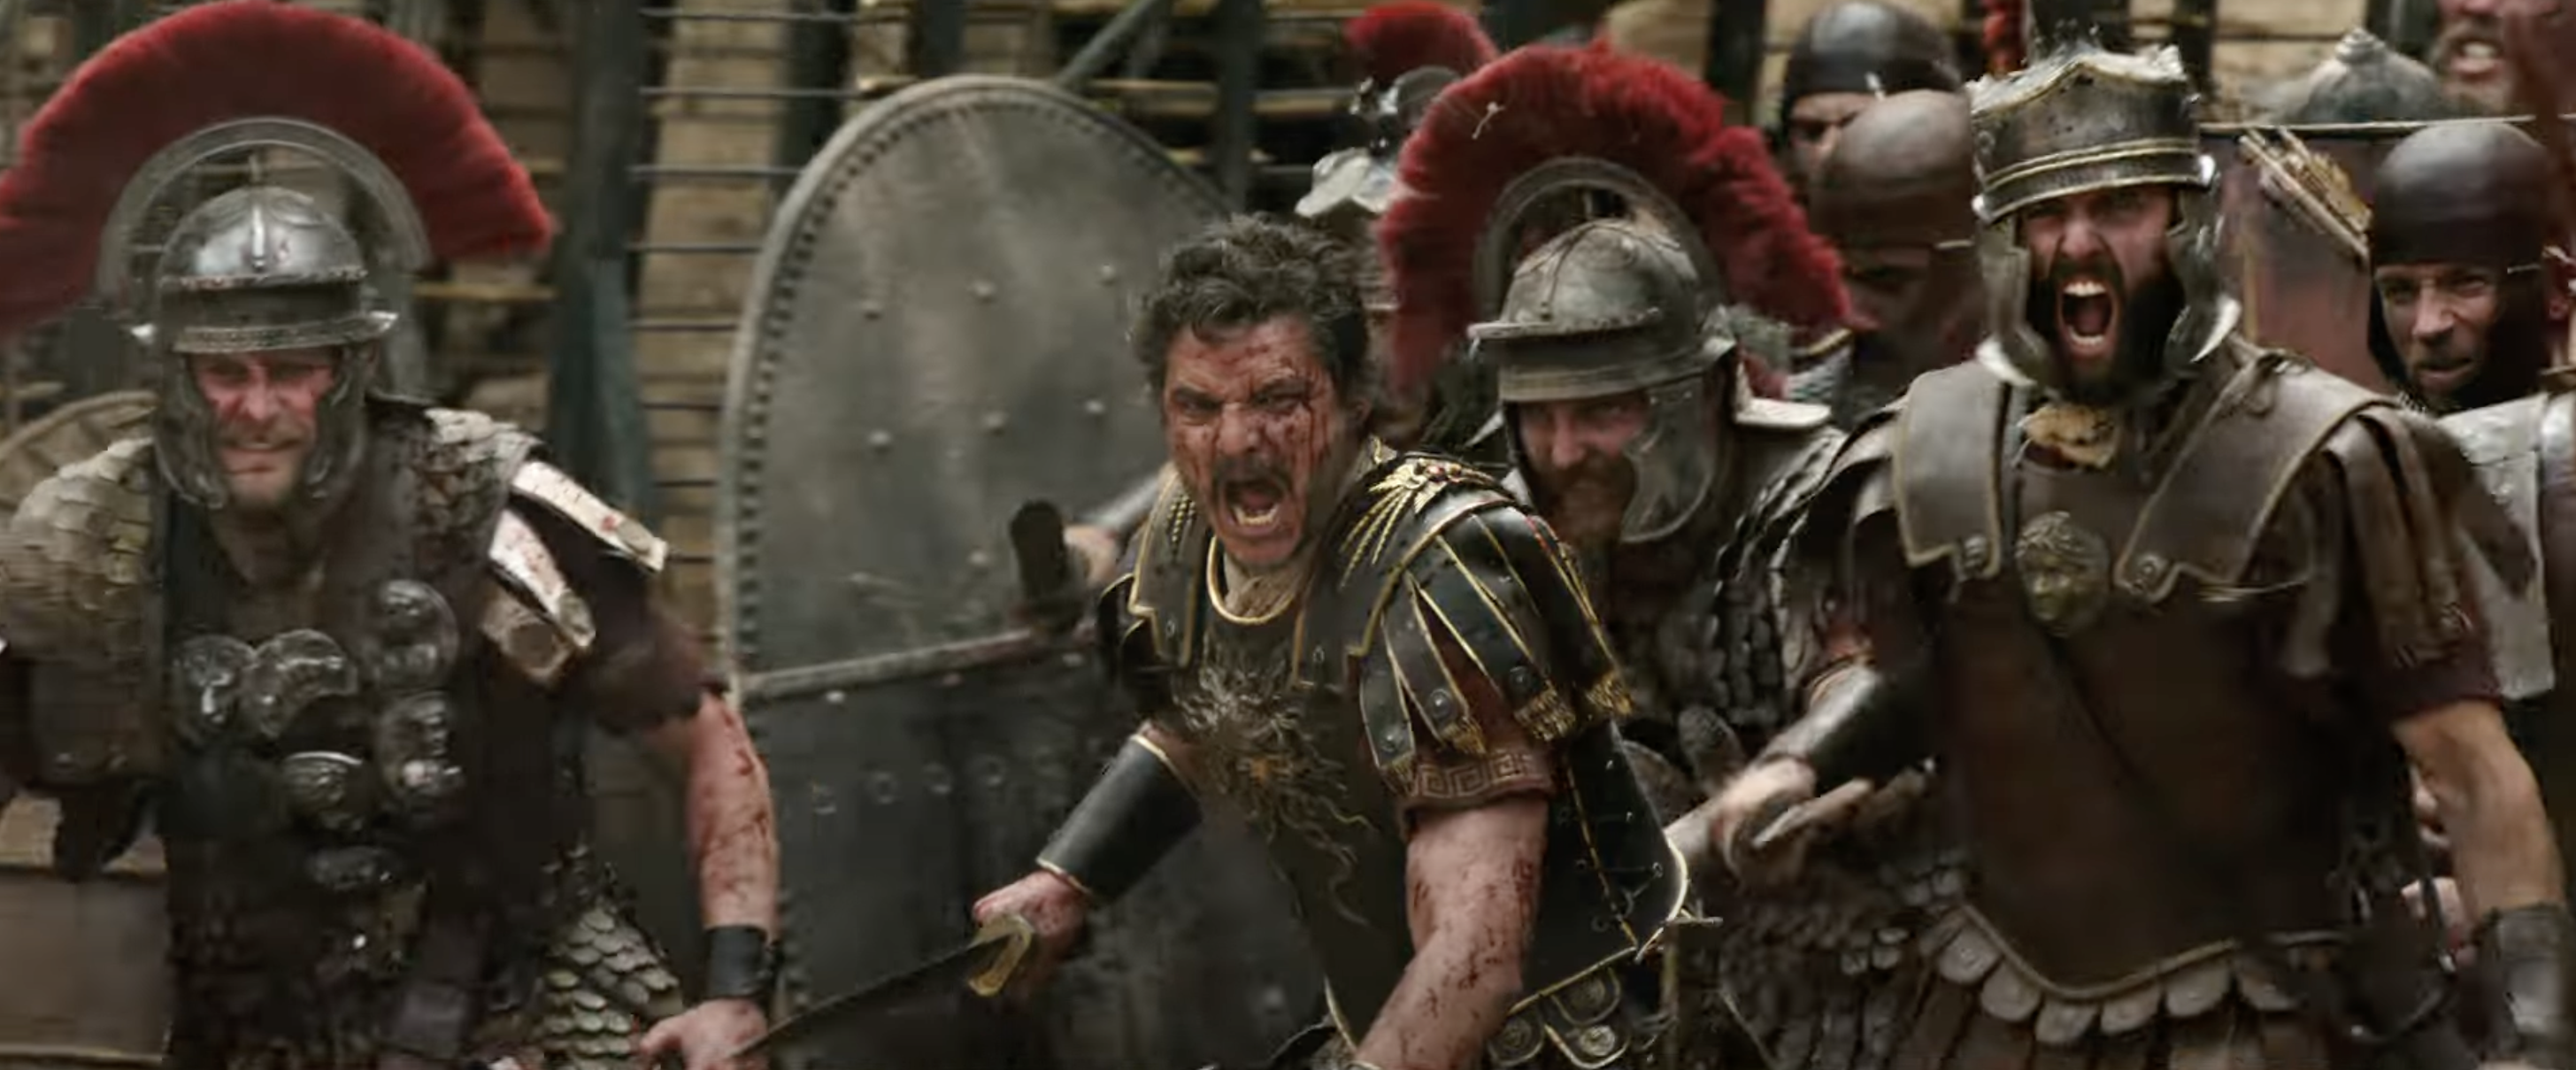 Scene from a historical film featuring actors in Roman soldier costumes, brandishing weapons and shields in the midst of battle